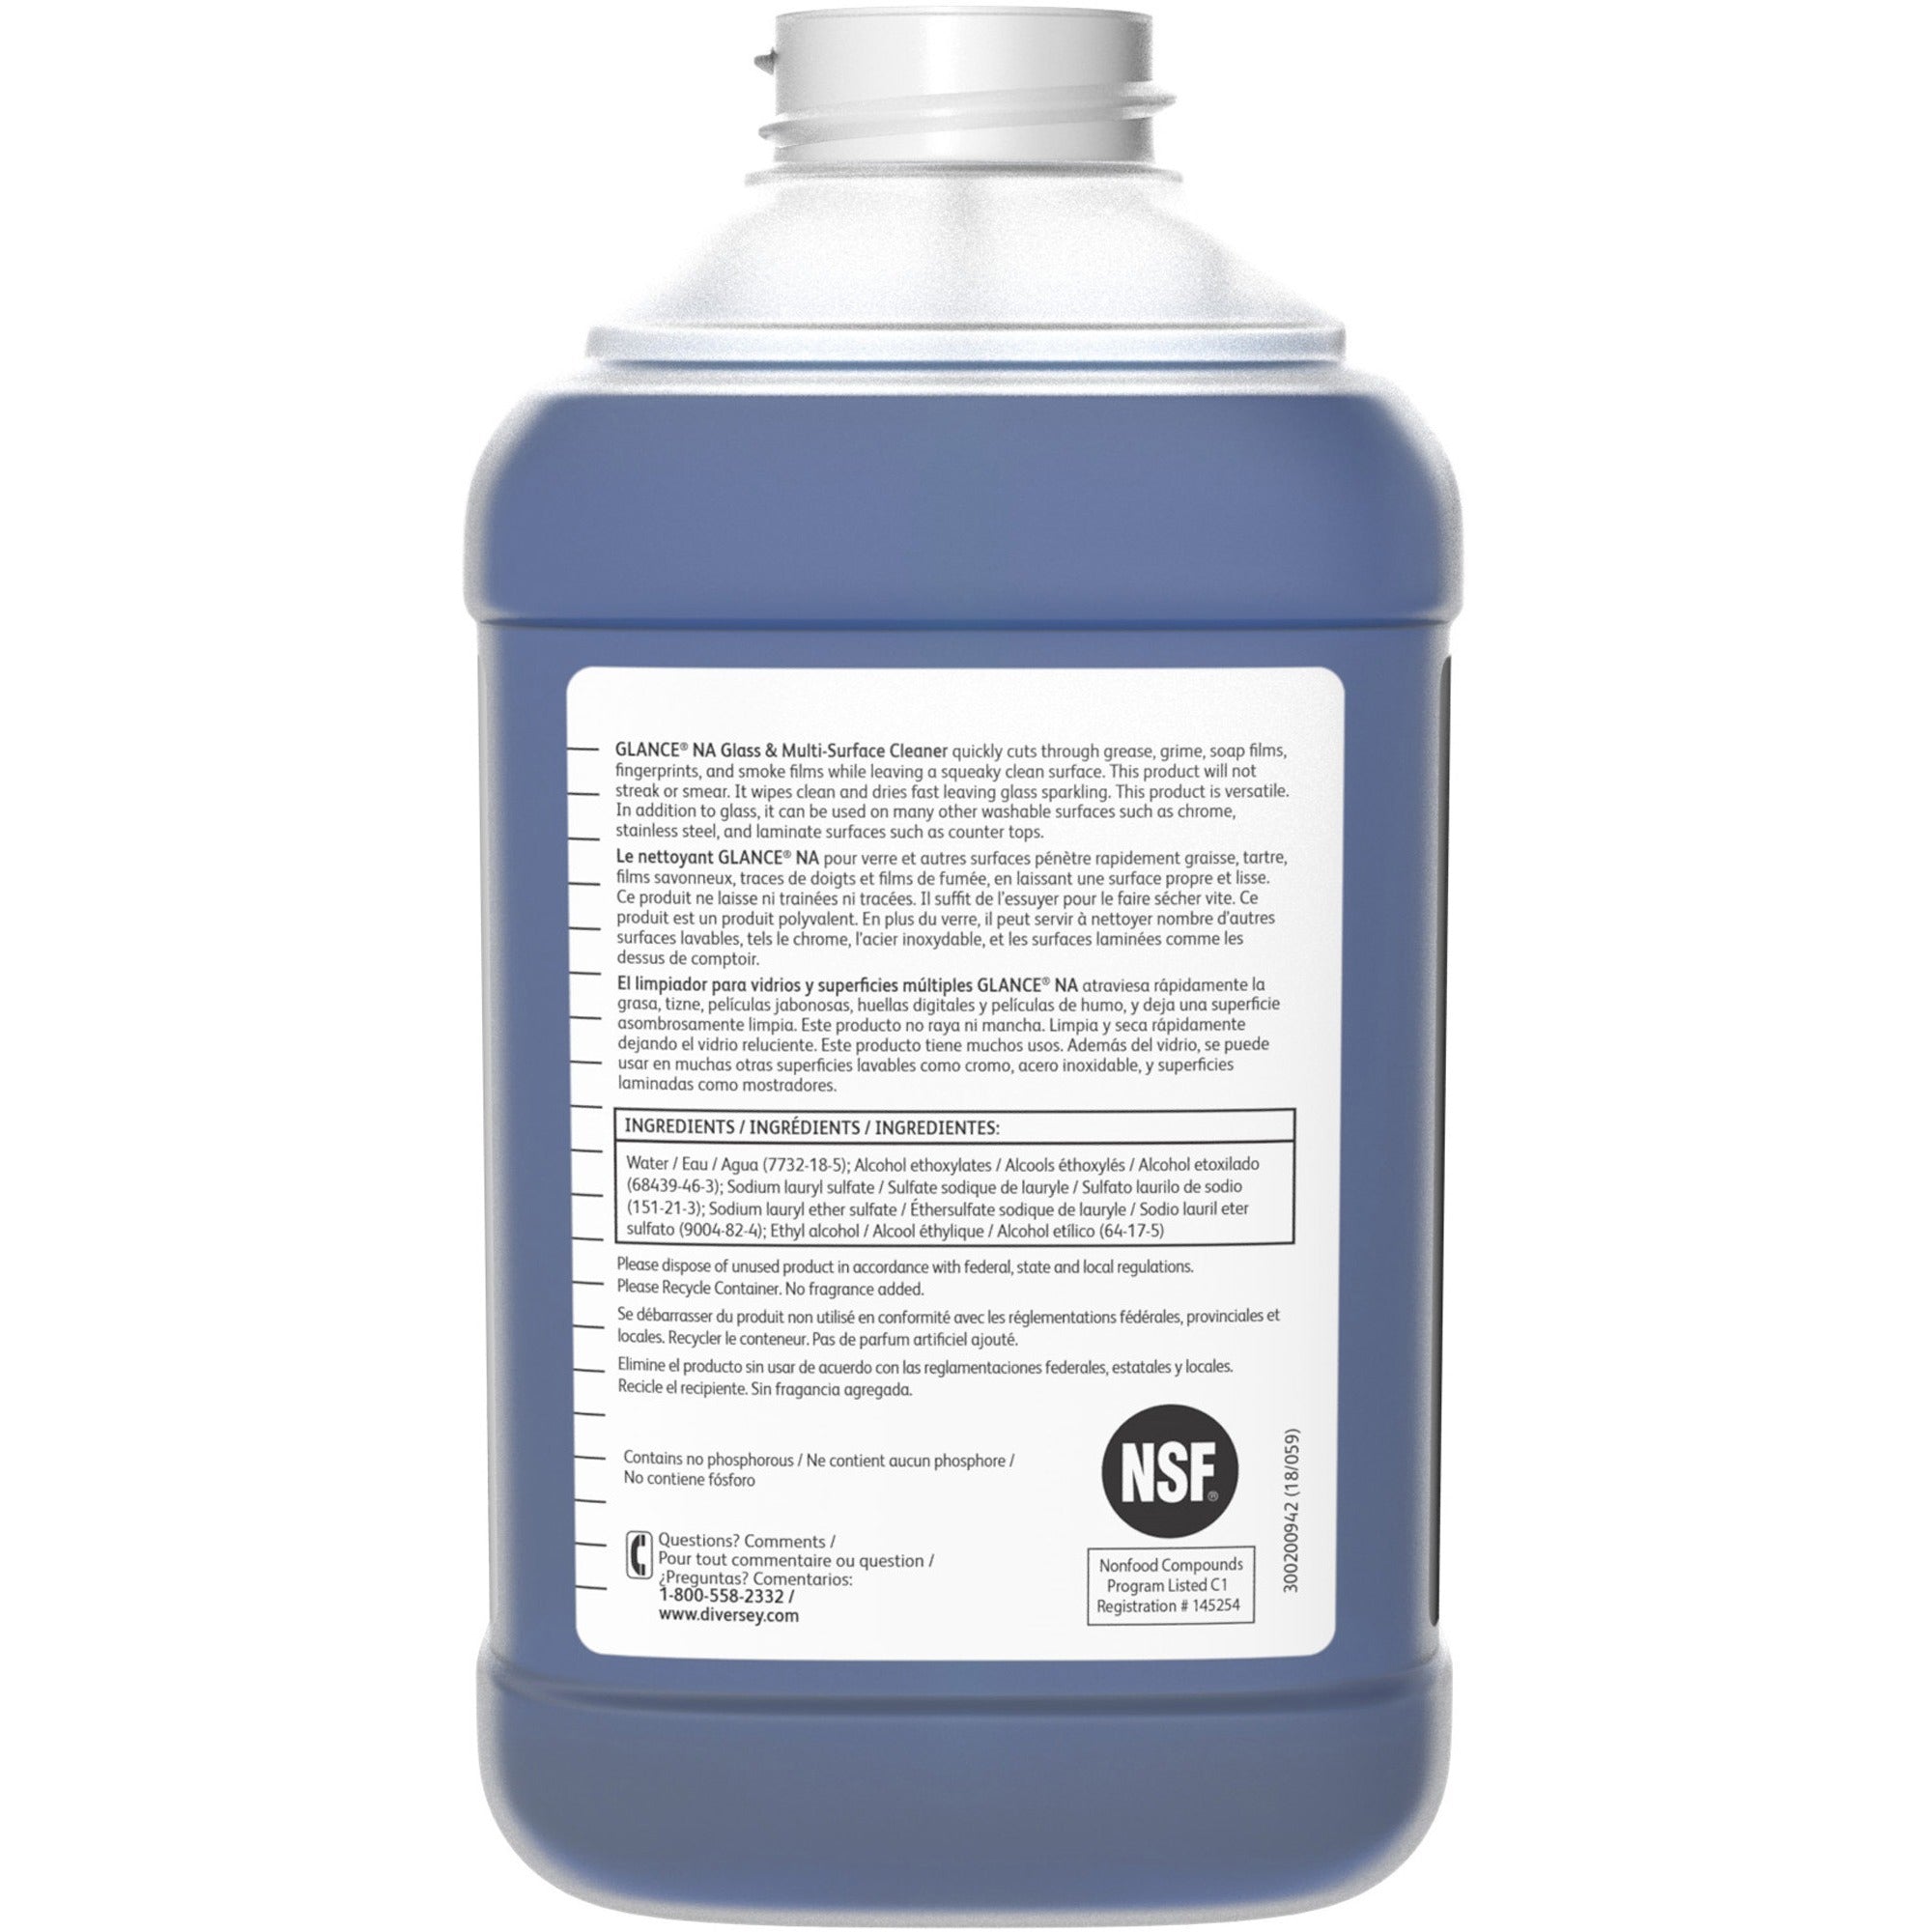 diversey-glance-hc-glass-multisurface-cleaner-concentrate-845-fl-oz-26-quart-ammonia-scentbottle-1-each-non-streaking-quick-drying-streak-free-blue_dvo905779 - 2